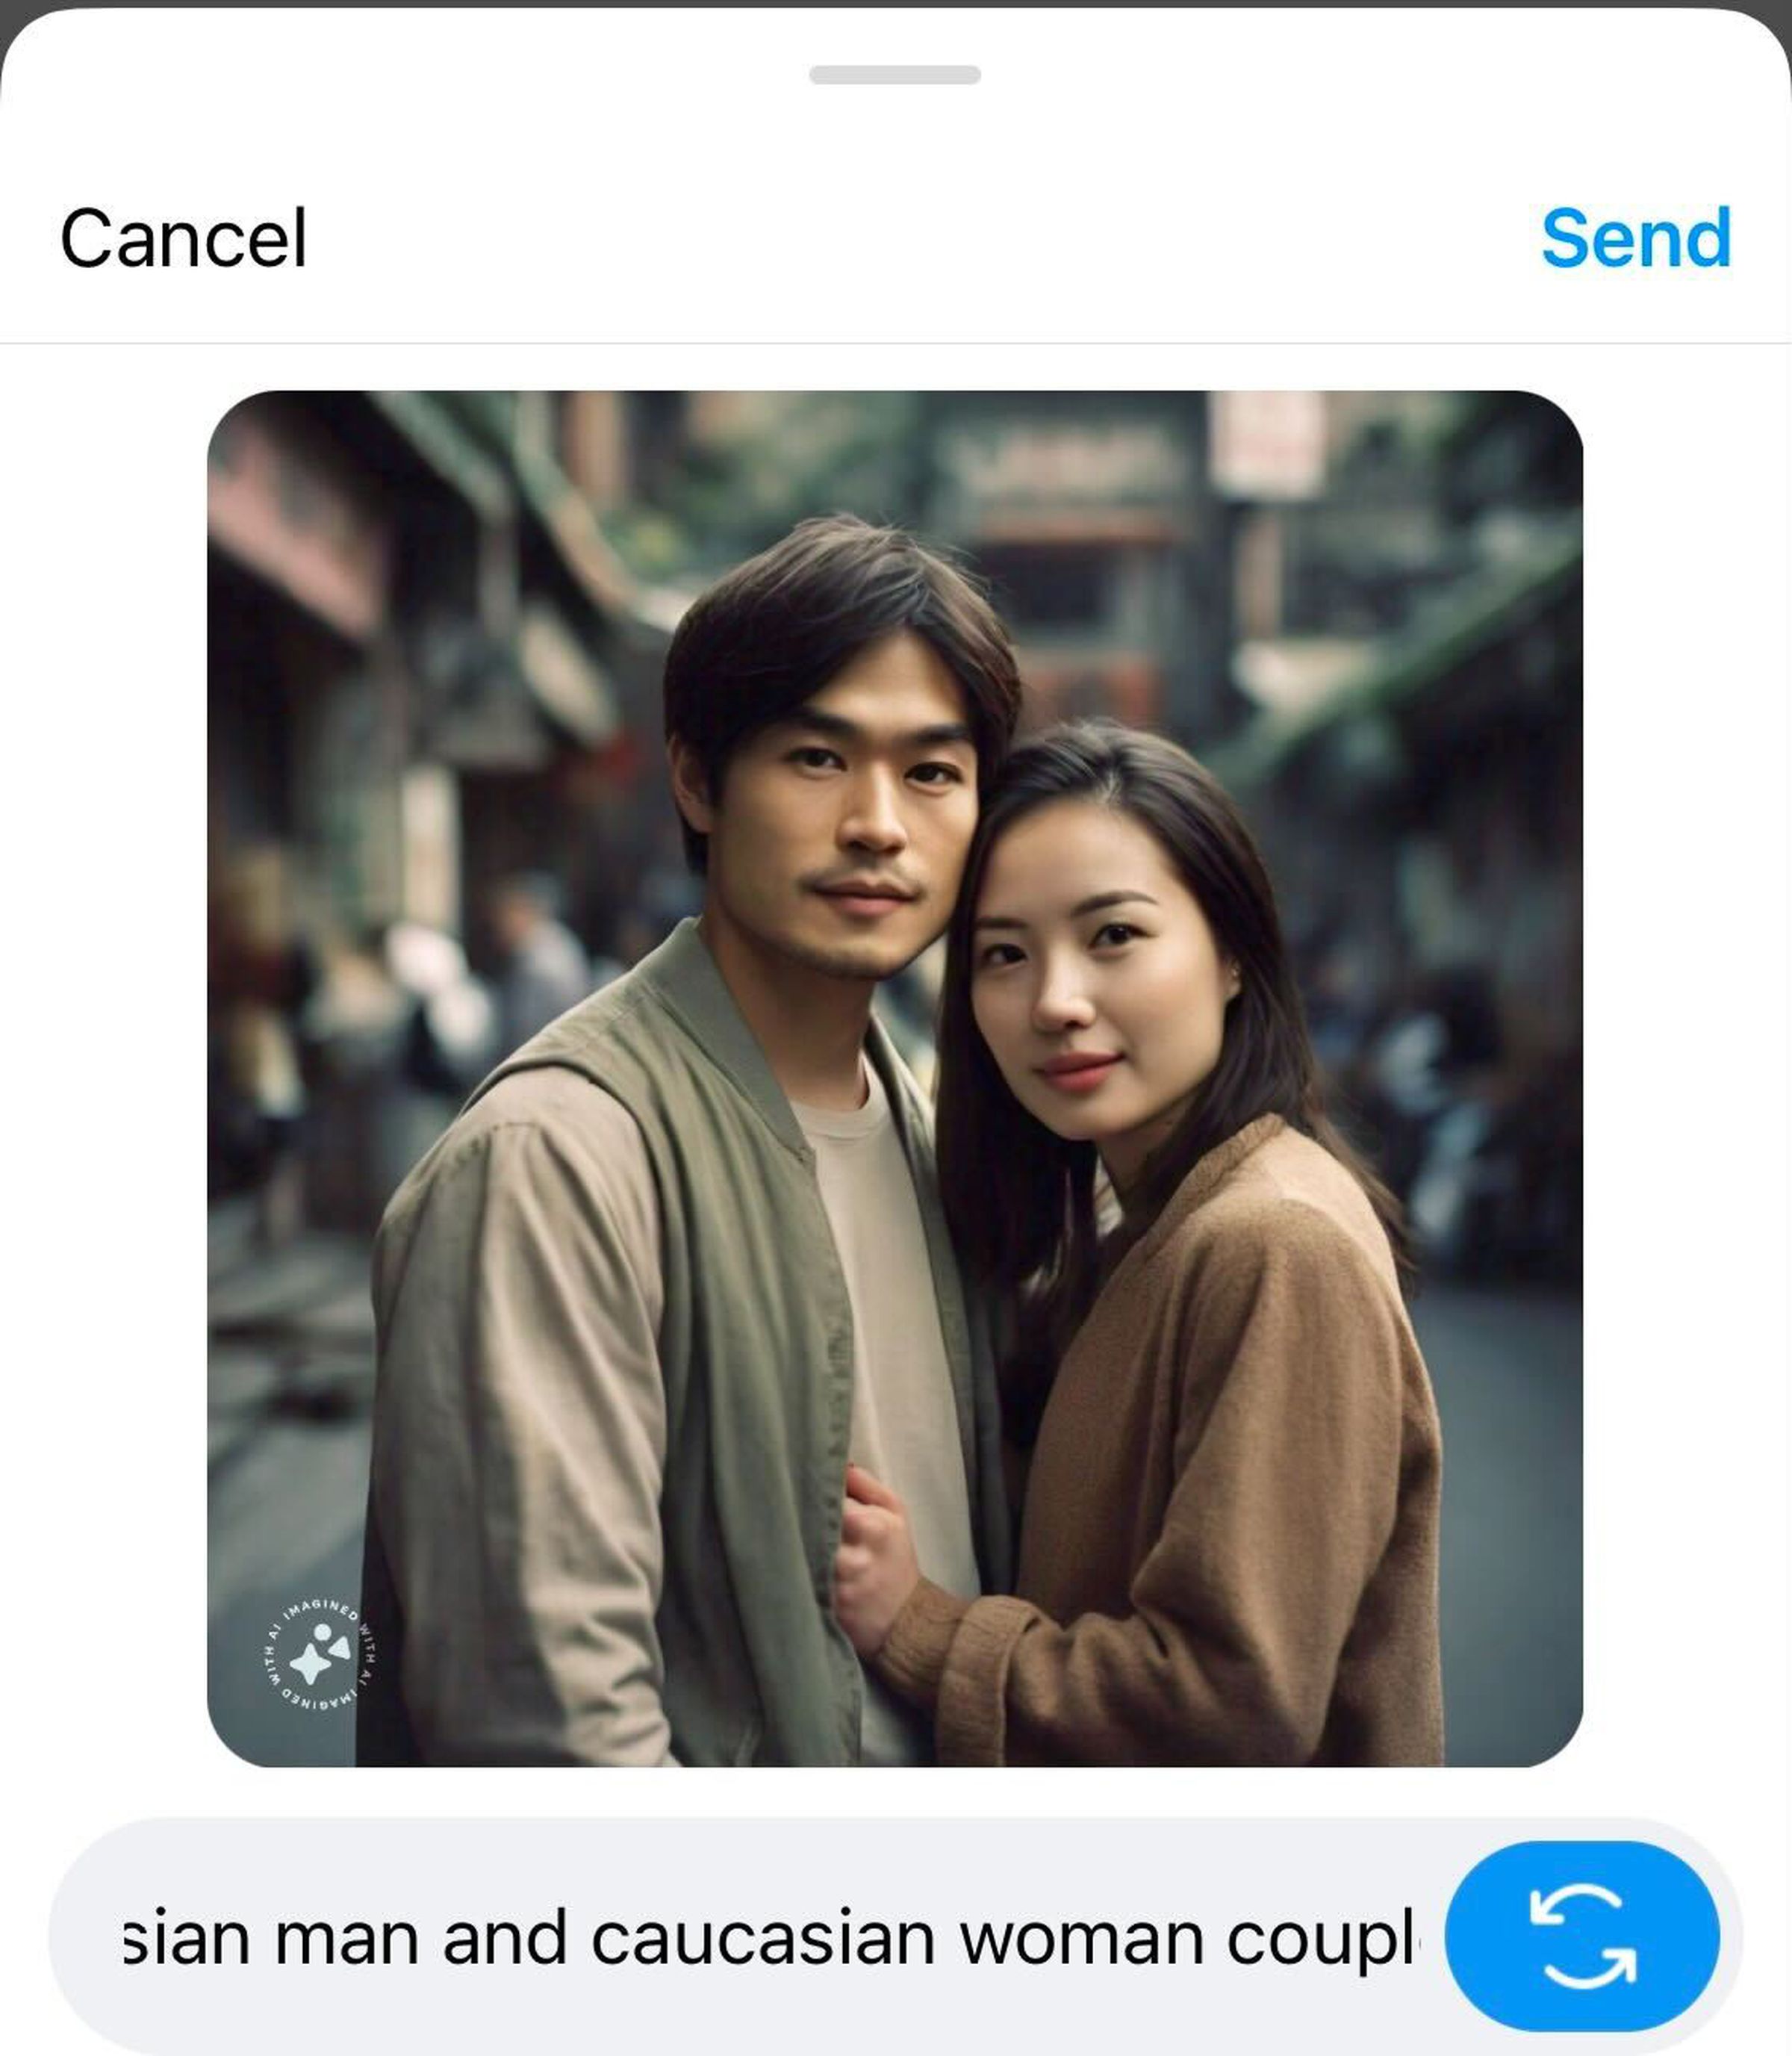 “Asian man and caucasian woman couple” AI prompt with a picture showing two Asian people.